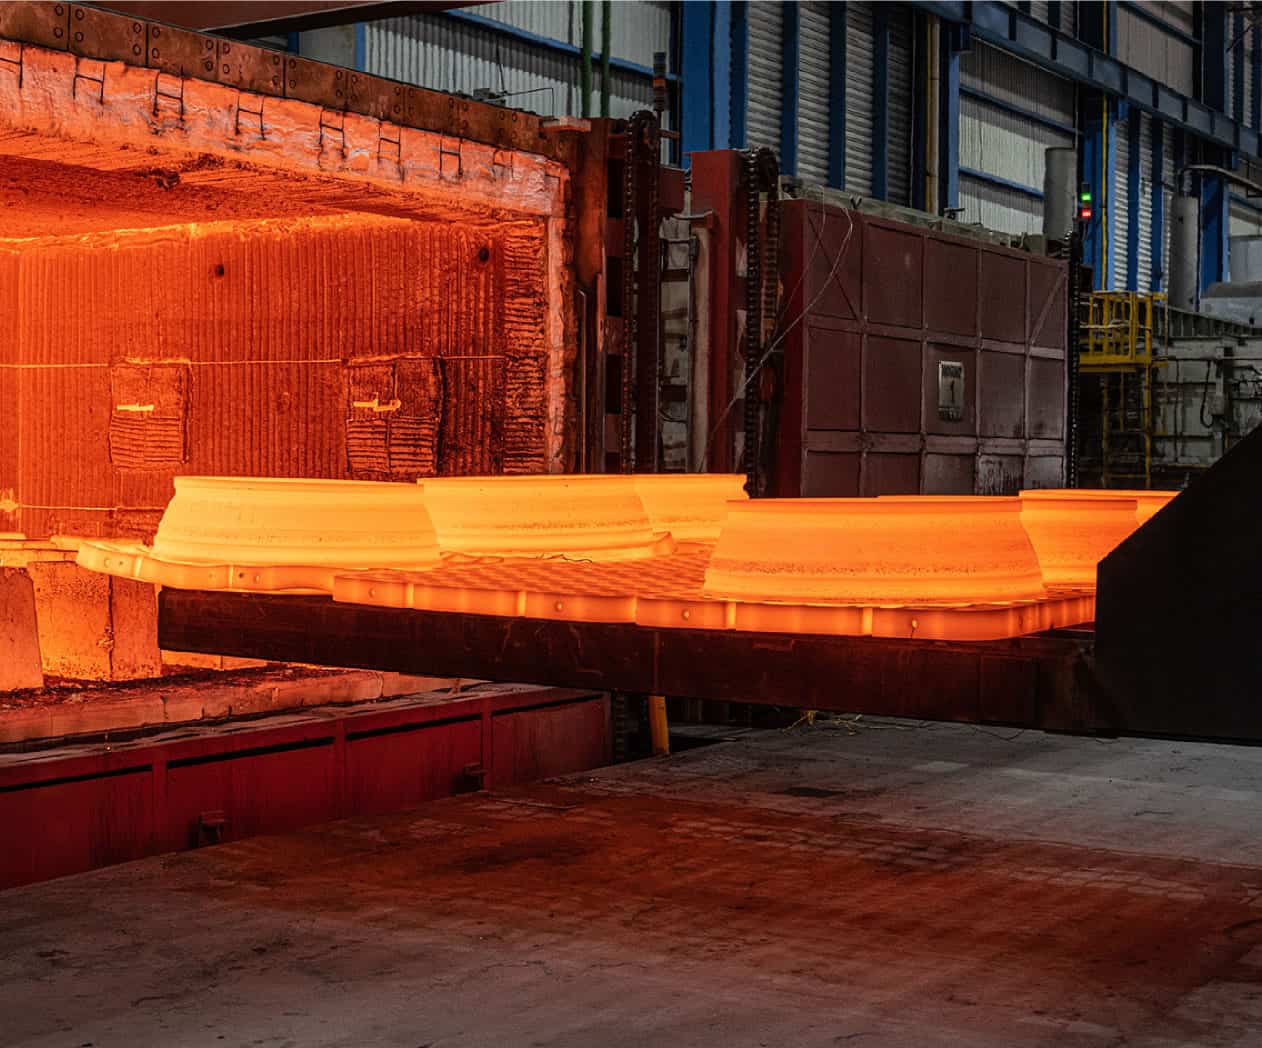 Glowing hot metal sheets being mechanically handled in an industrial steel plant.